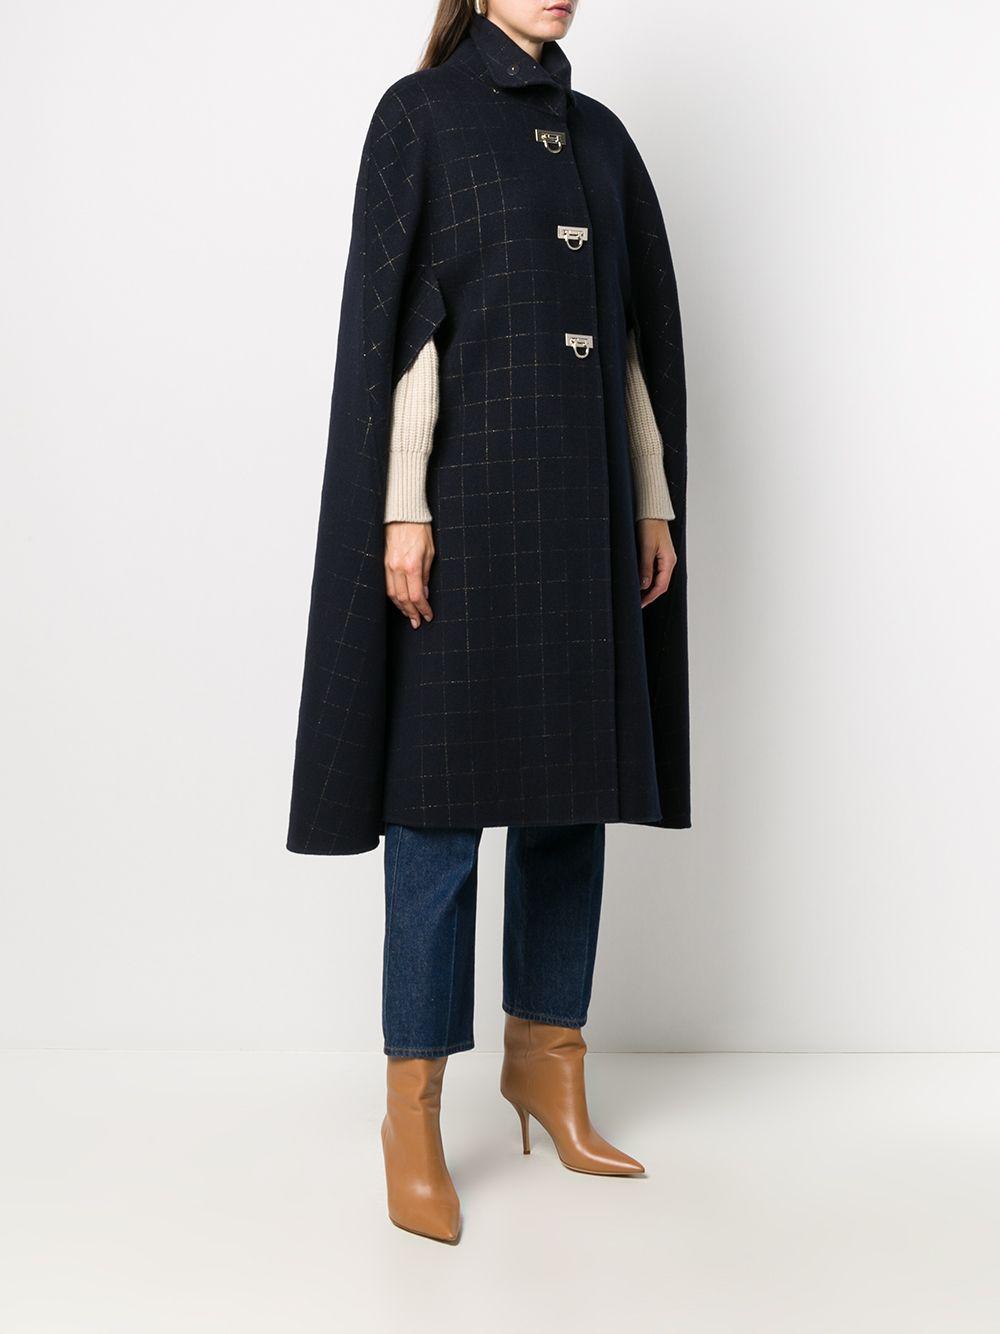 Sandro Wool Check-pattern Cape Coat in Blue - Lyst